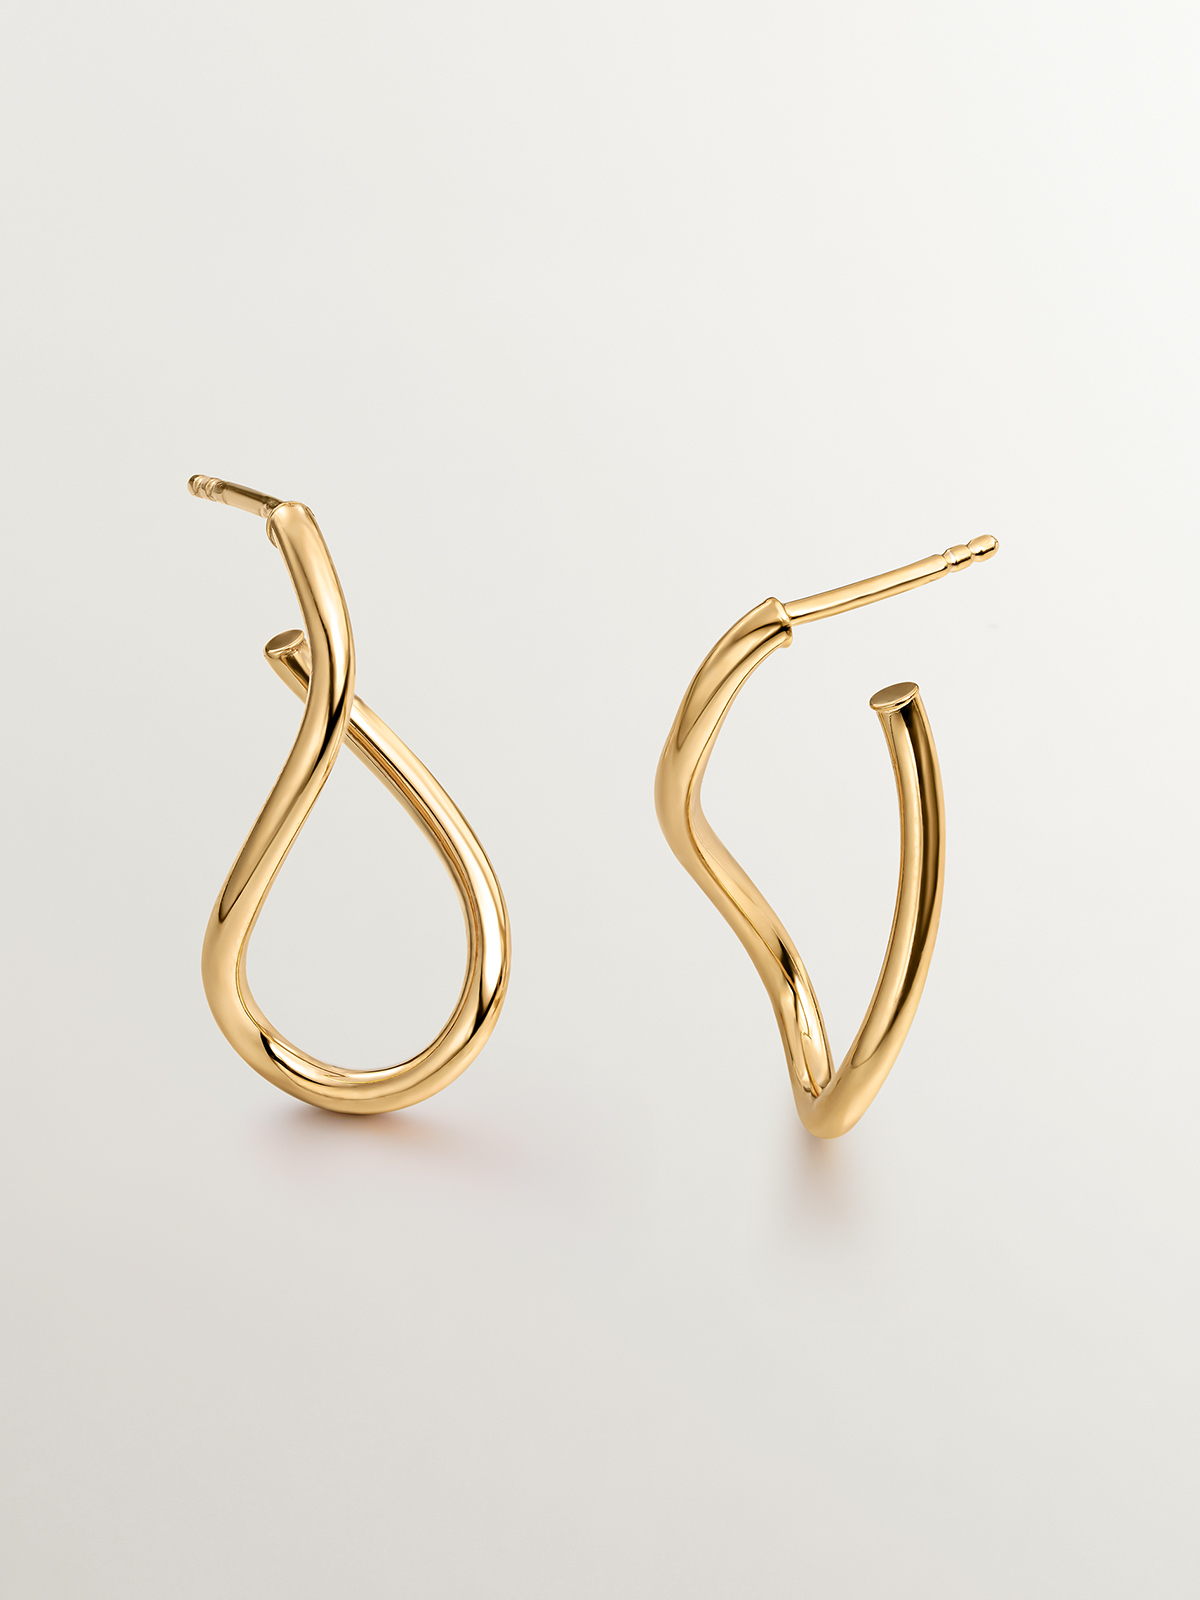 Medium wavy hoop earrings made from 925 silver, plated in 18K yellow gold